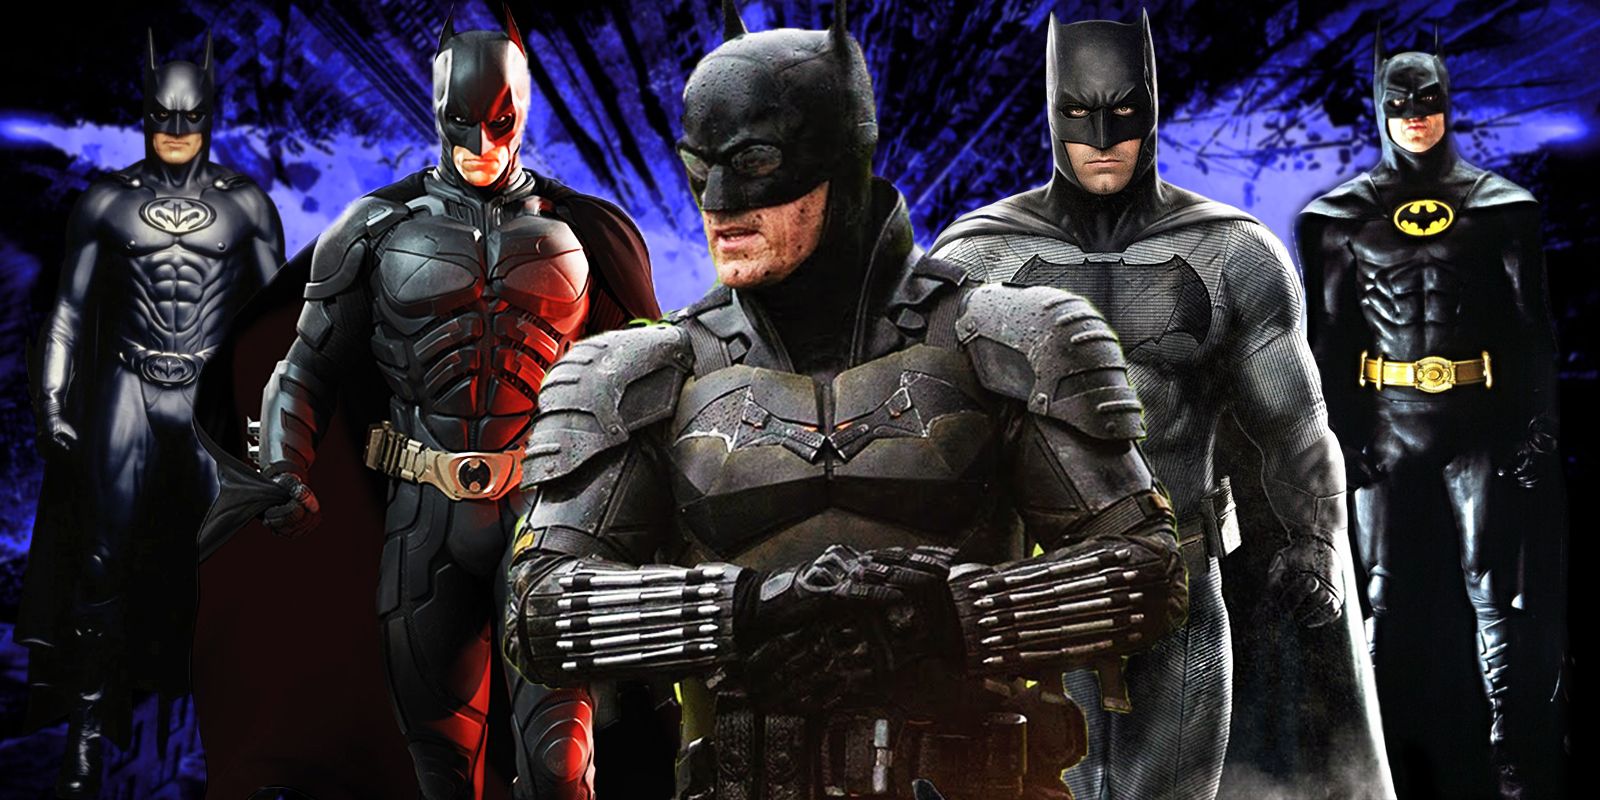 How The Batman Will Be Different From Other Batman Movies